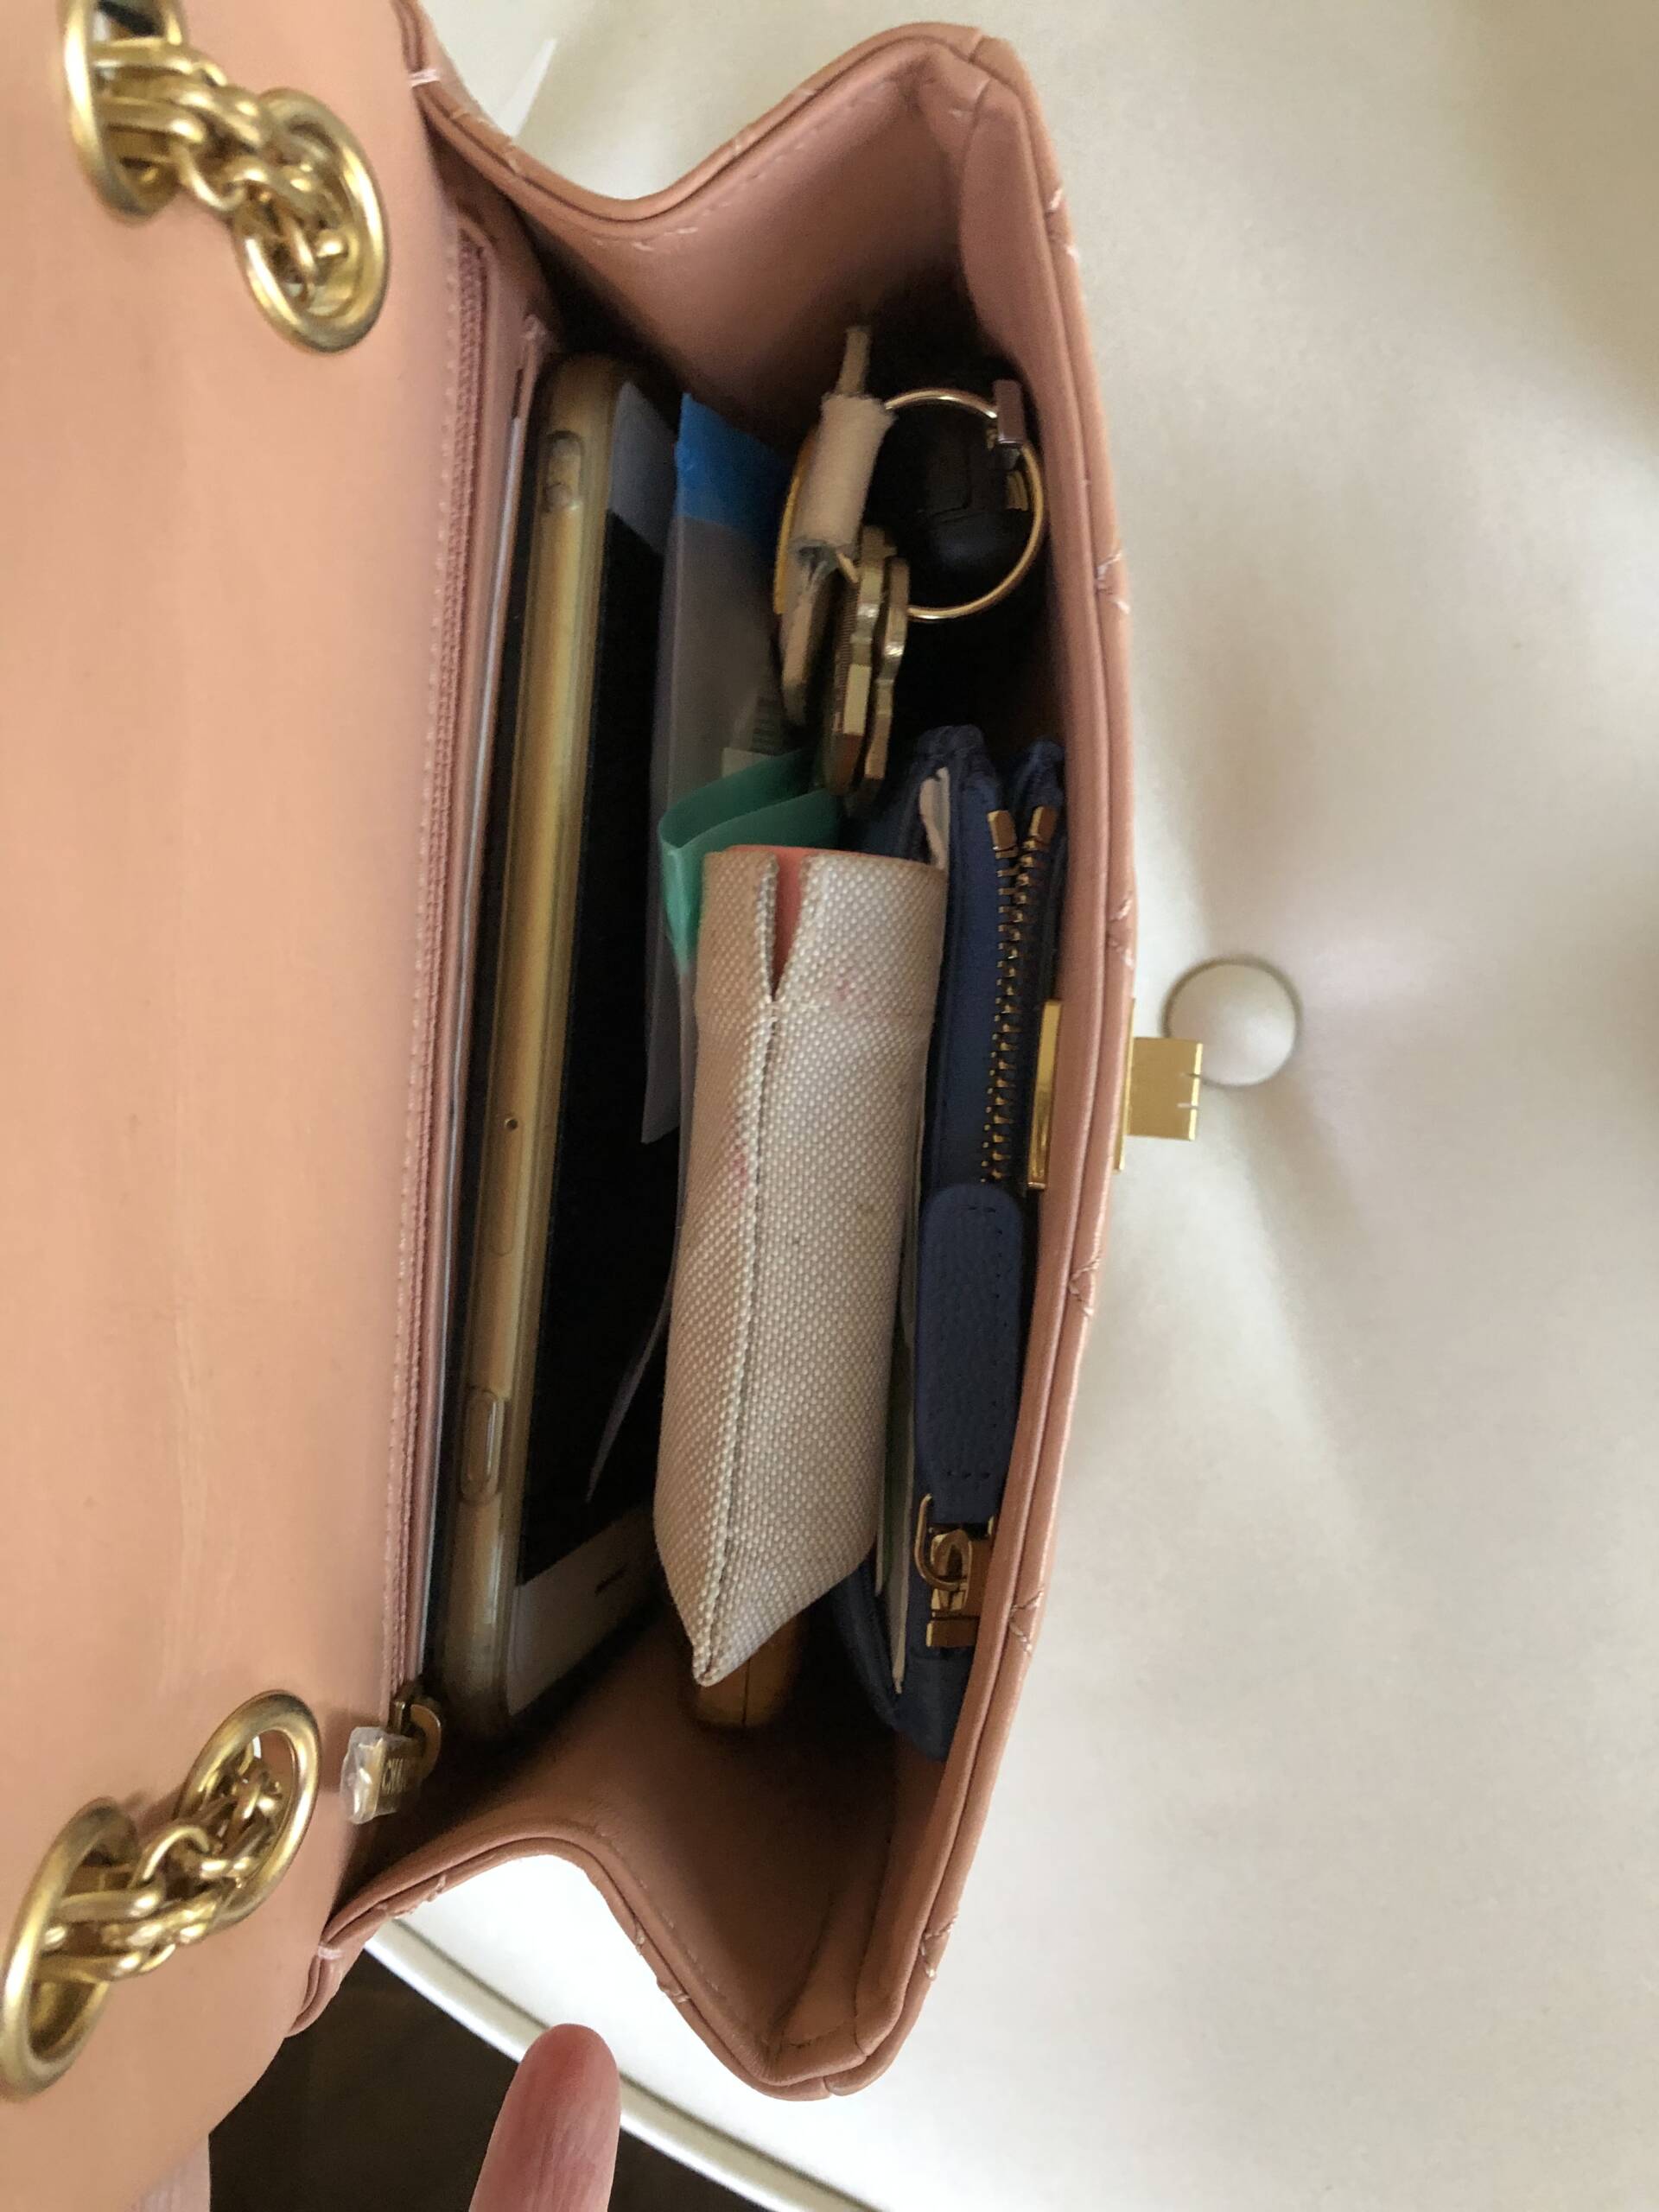 Is The Chanel Mini Flap A Good Investment Bag? - Christinabtv